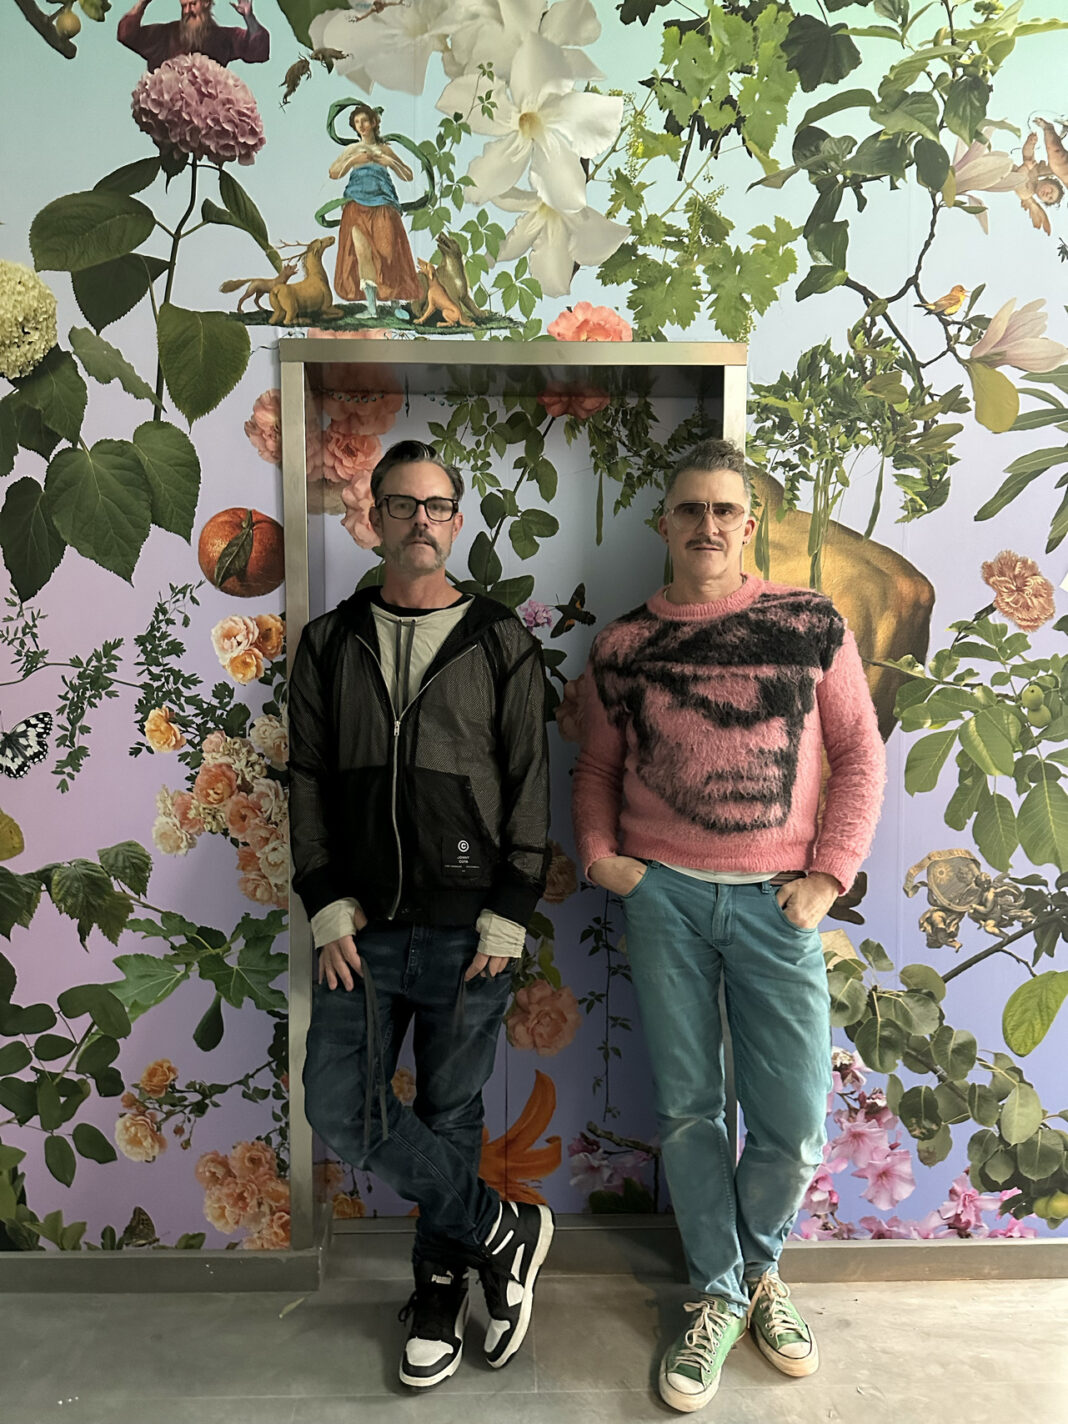 David Allen Burns and Austin Young stand in front of mural